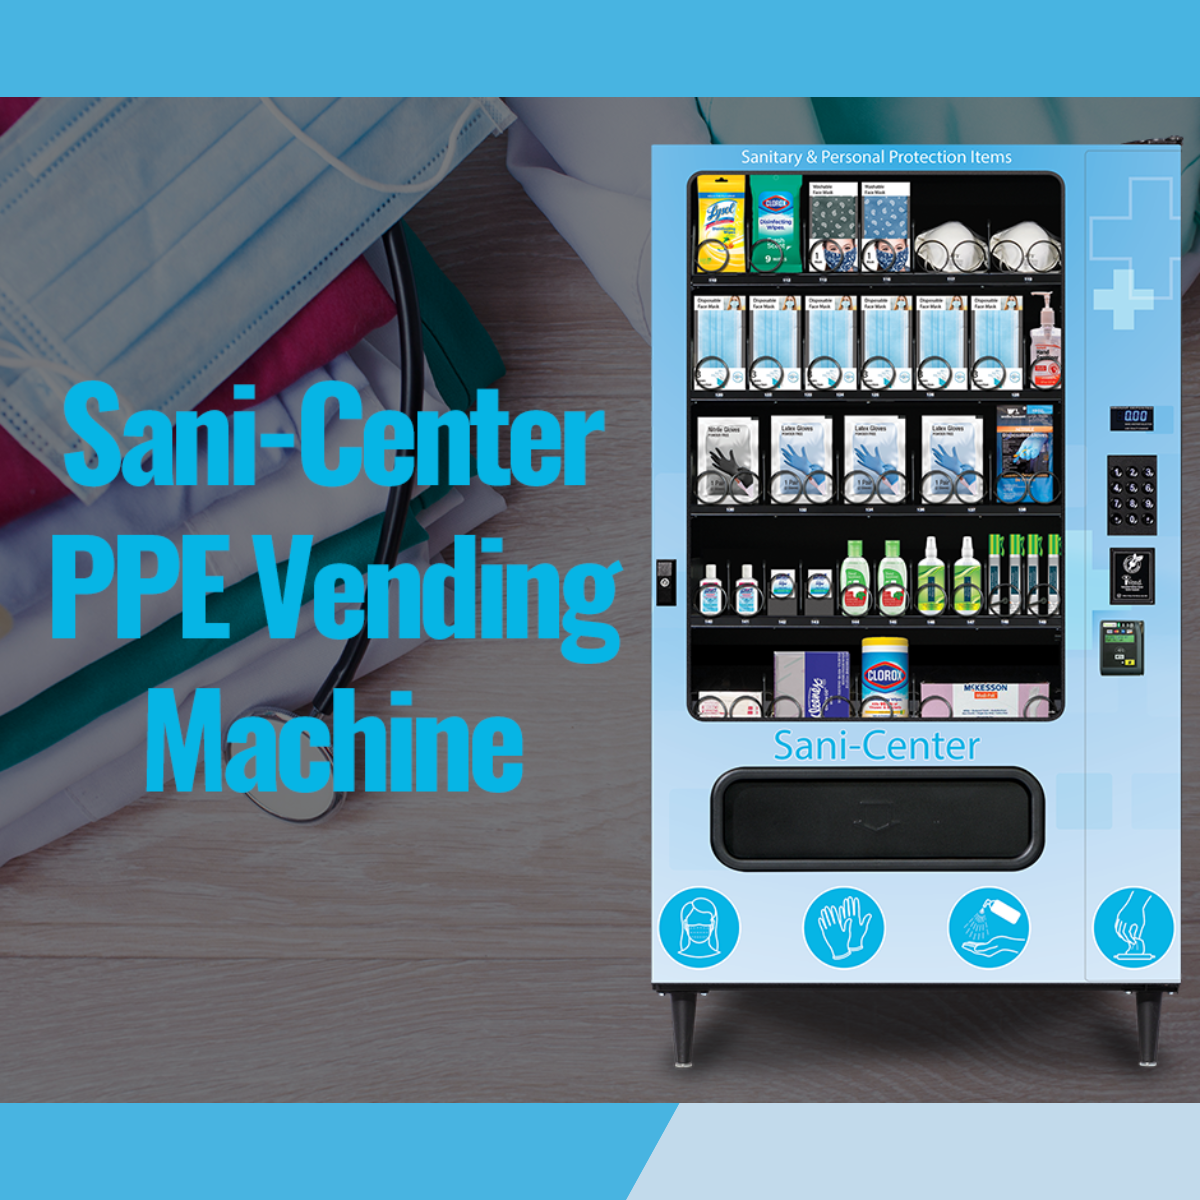 SANI-CENTER PPE VENDING MACHINE: KEEPING YOUR CUSTOMERS SAFE